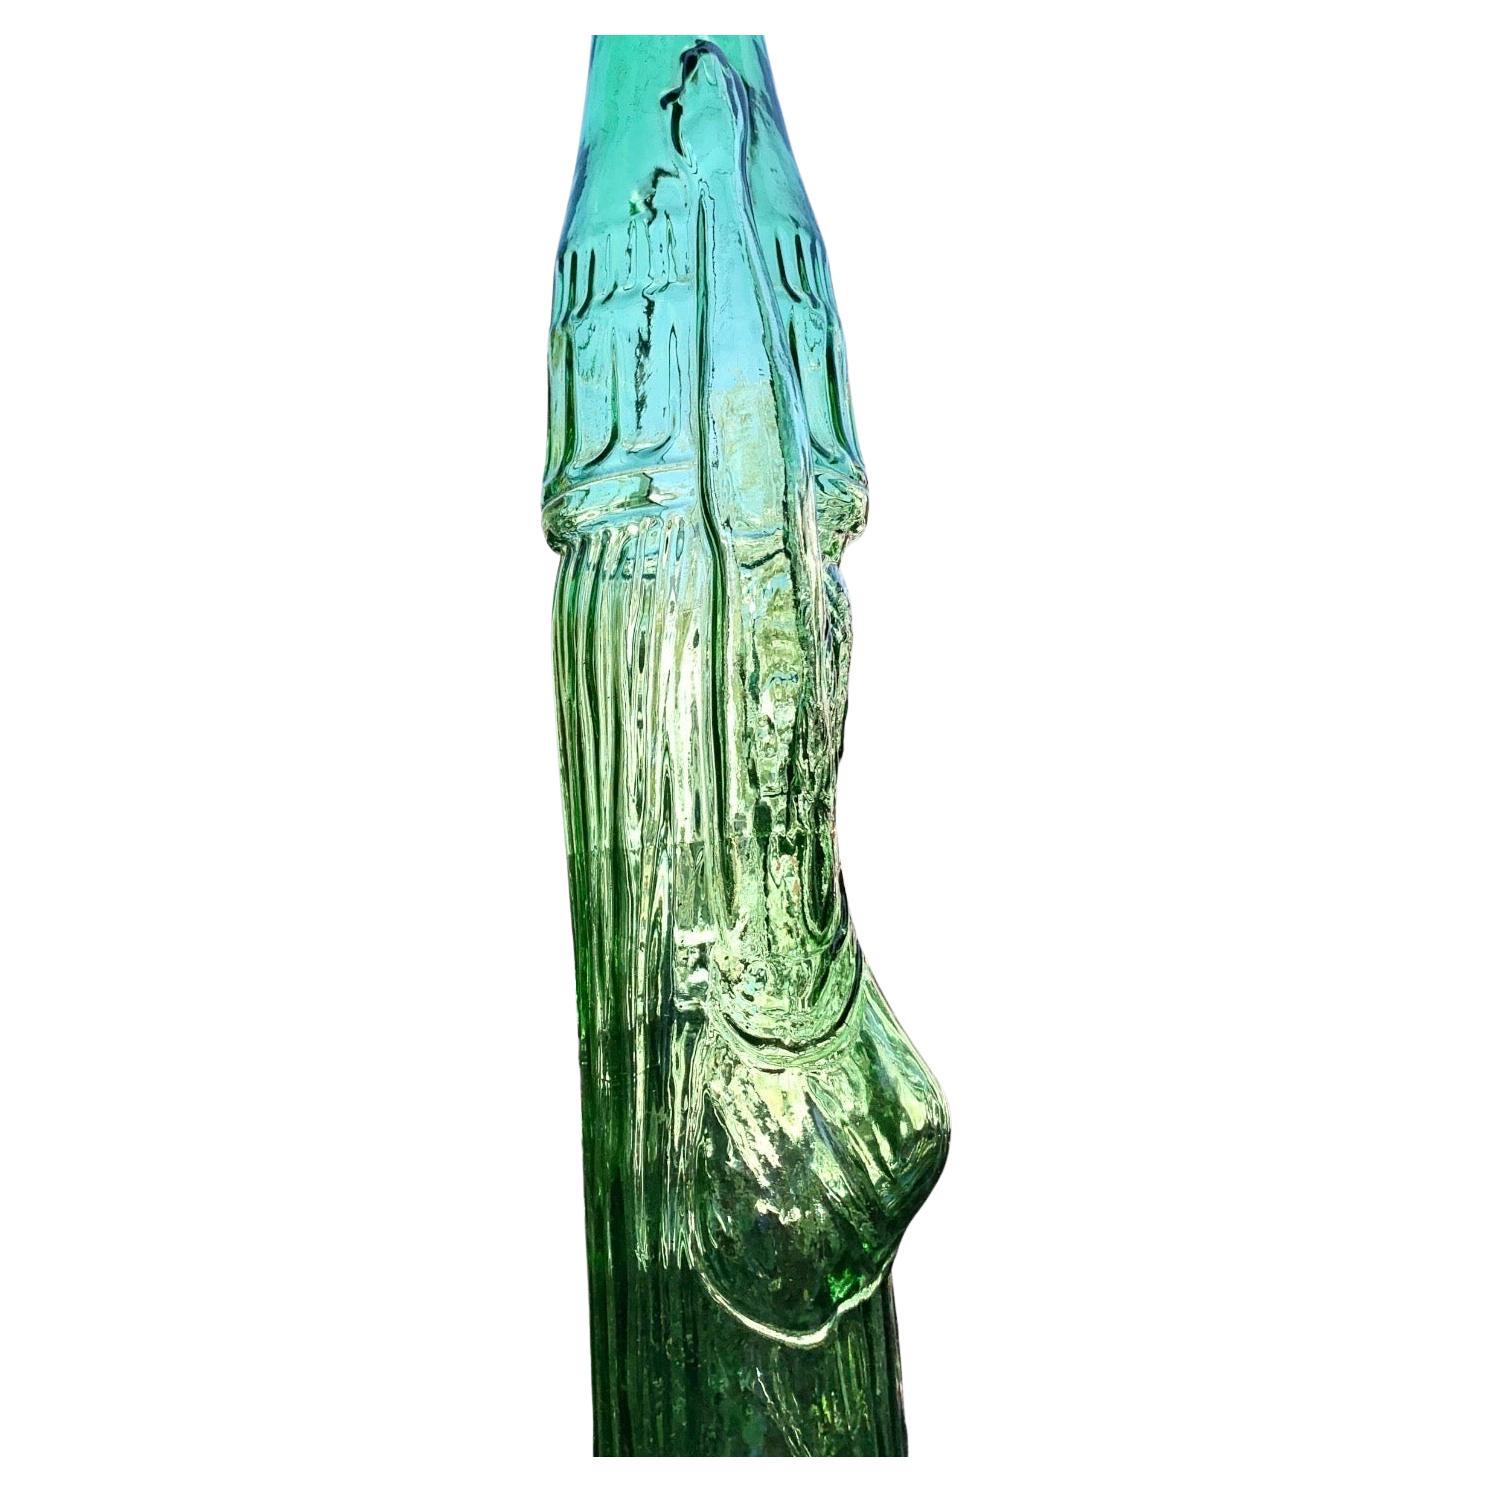 A vintage mid century tall glass wine bottle, limited addition from the 1970’s. 
The bottle with 3 liter volume. Green glass
shaped as beautiful Roman woman in classical dress holding a bottle on her head. The bottle issued by Casa Vinicola Cecchi &